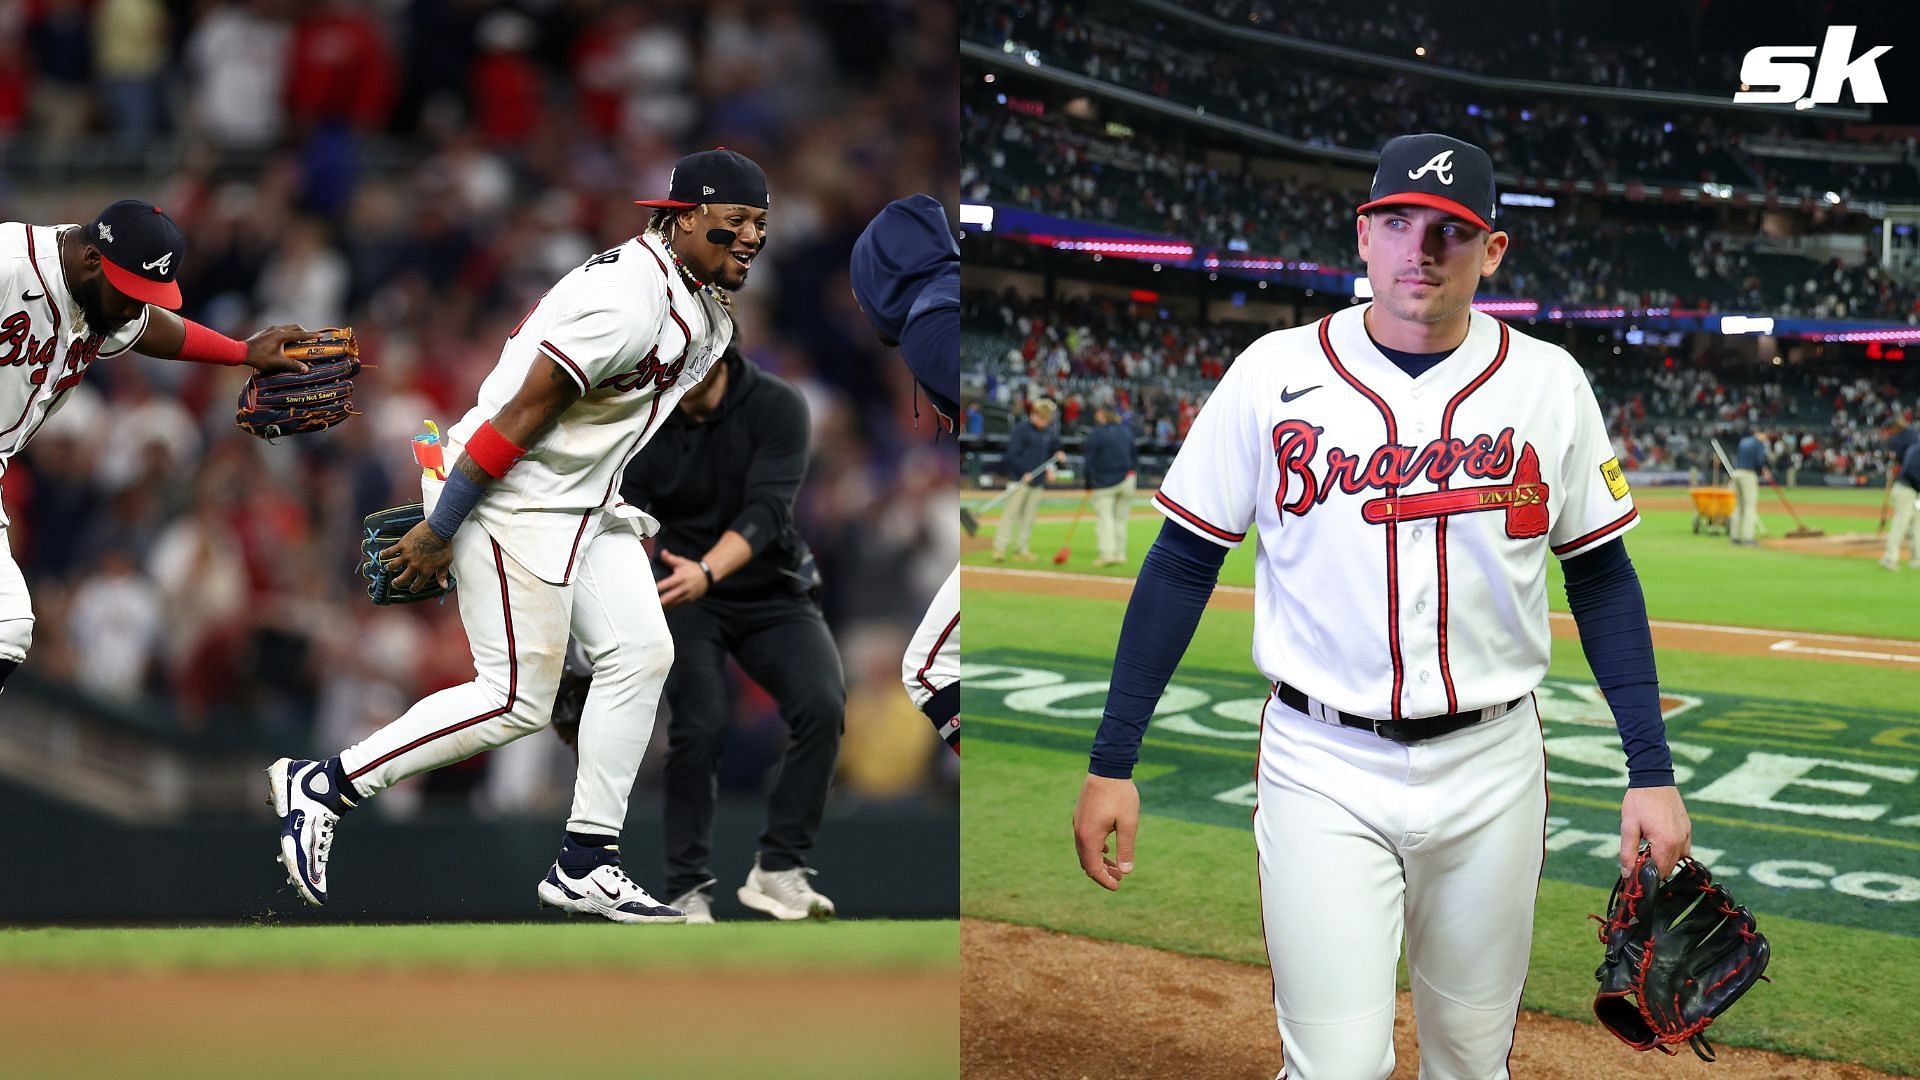 MLB fans go wild as Braves pull off spectacular win after electric defensive play. 